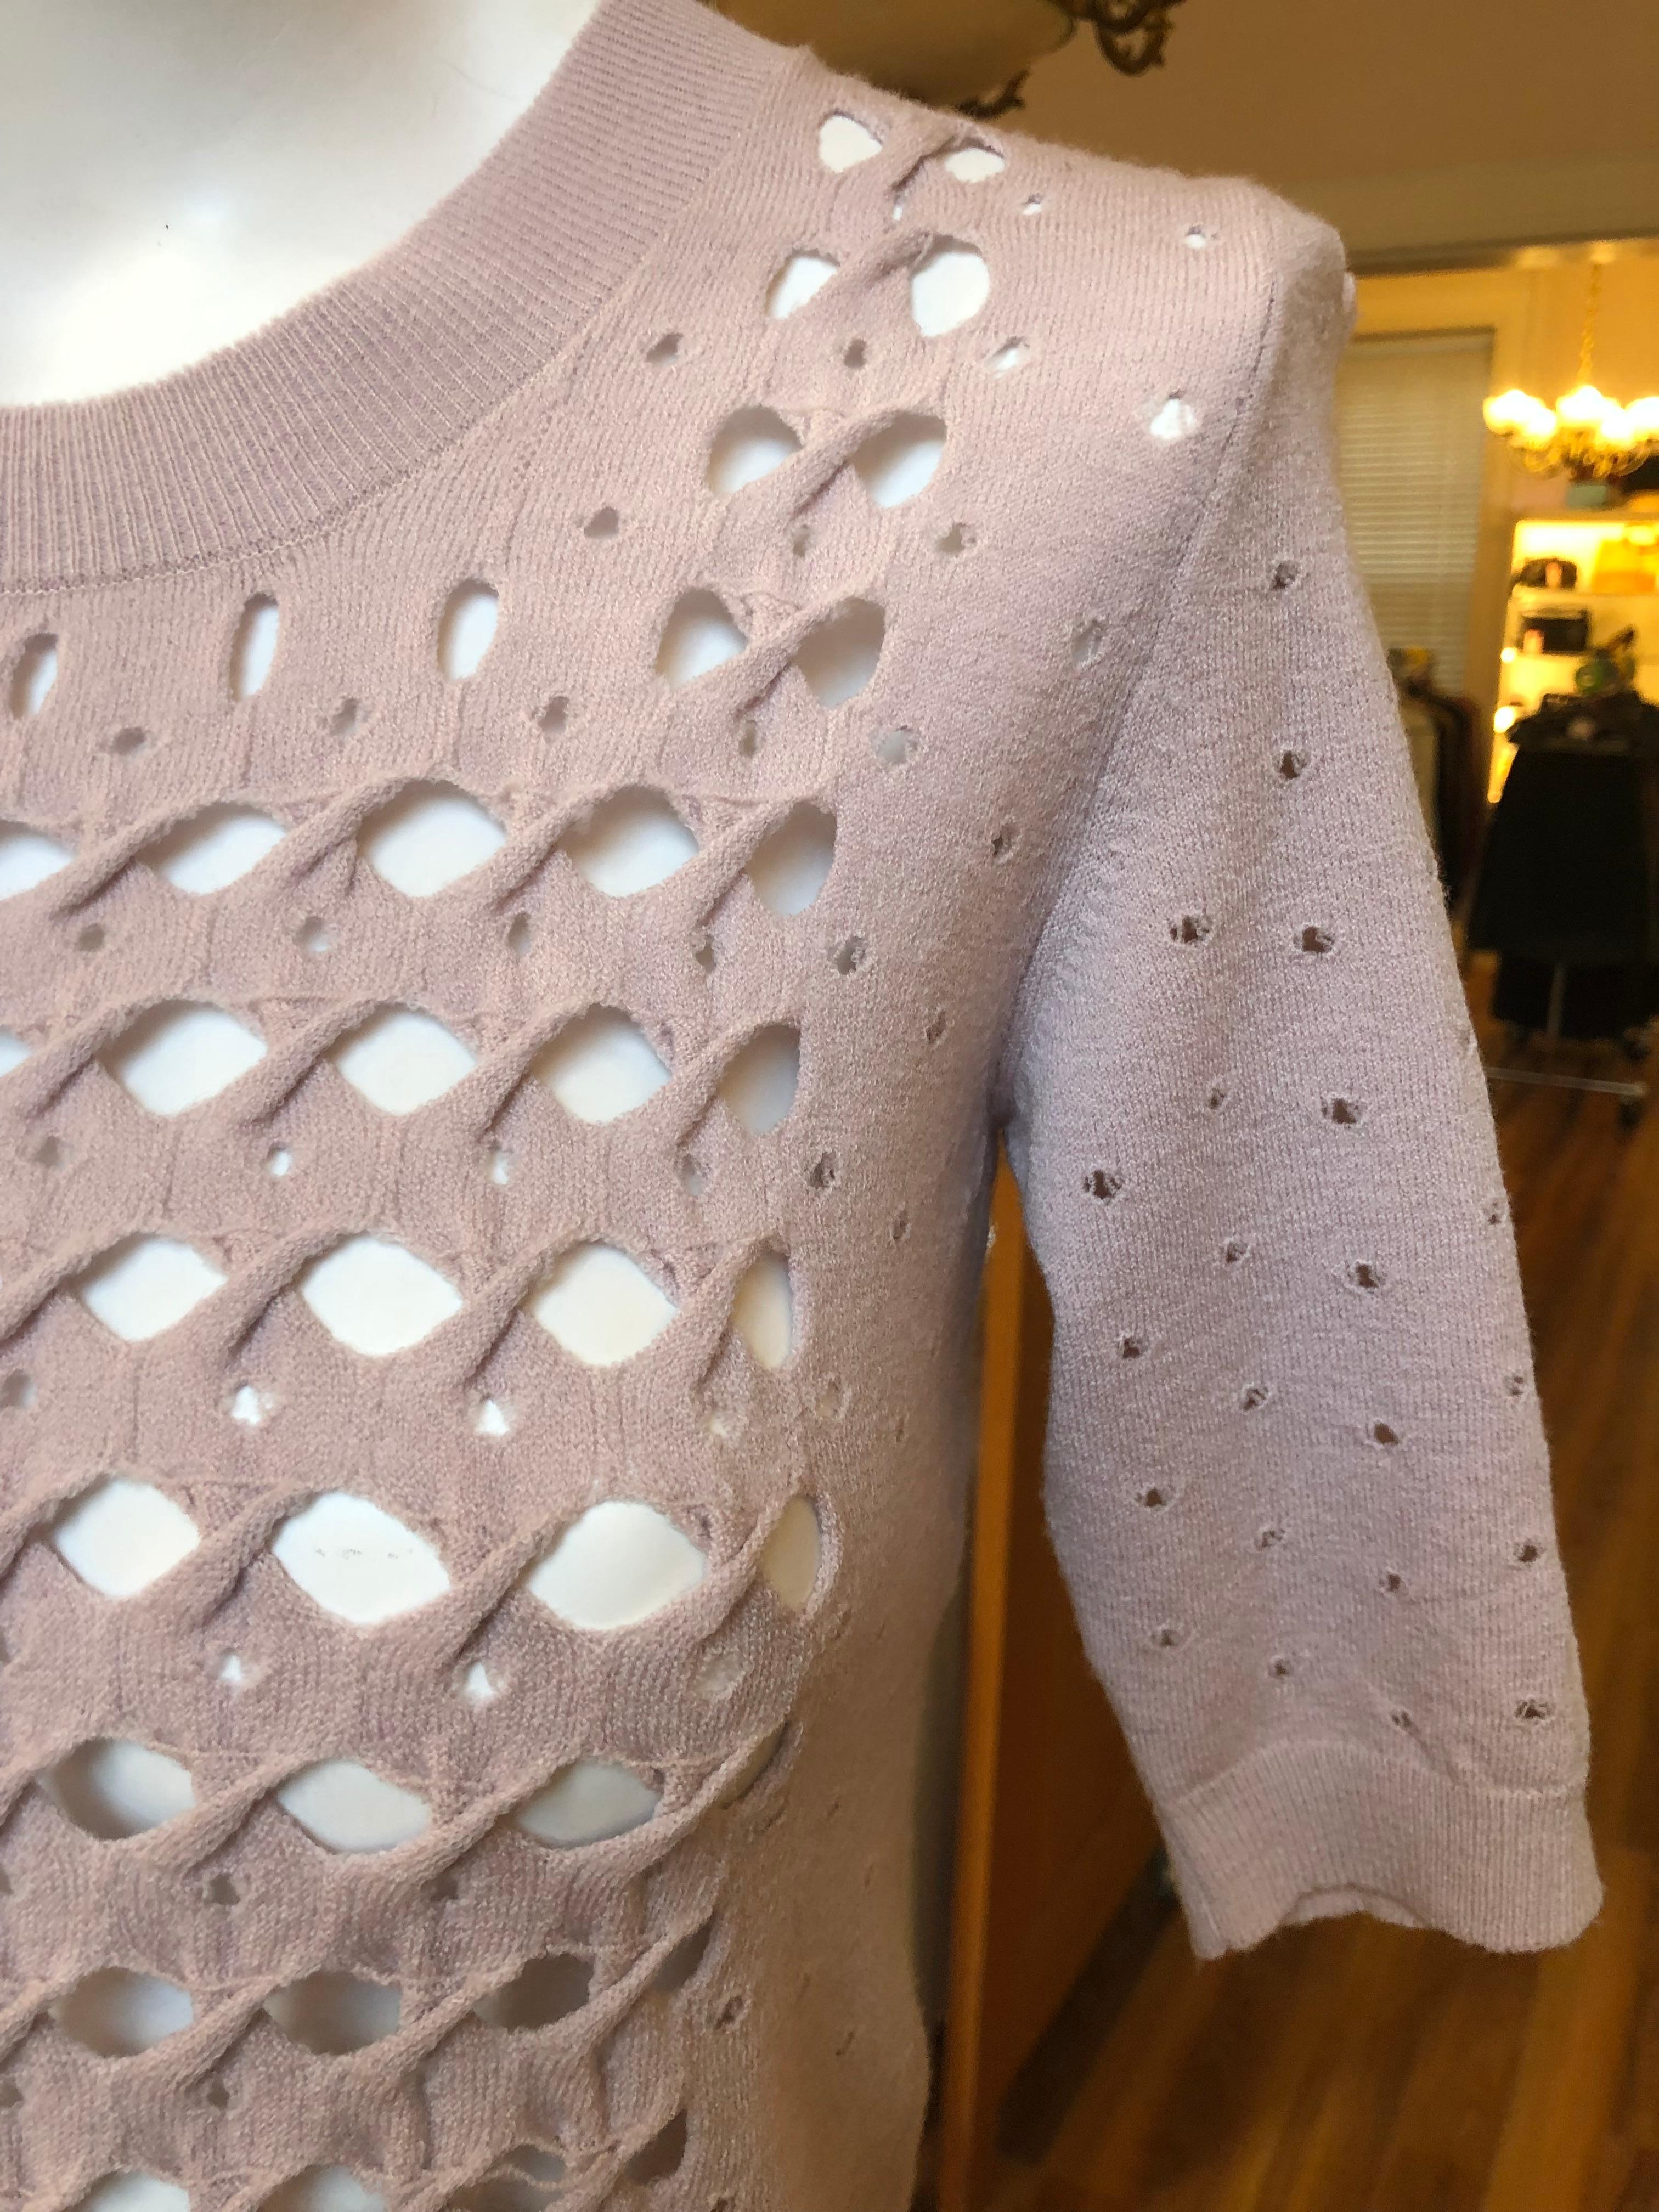 Lovely delicate lace knit 87% wool and 13% polyester sweater in a pale lilac color. The elbow length sleeves have a braided pattern, and the edges of the collar, bottom and sleeves are ribbed.